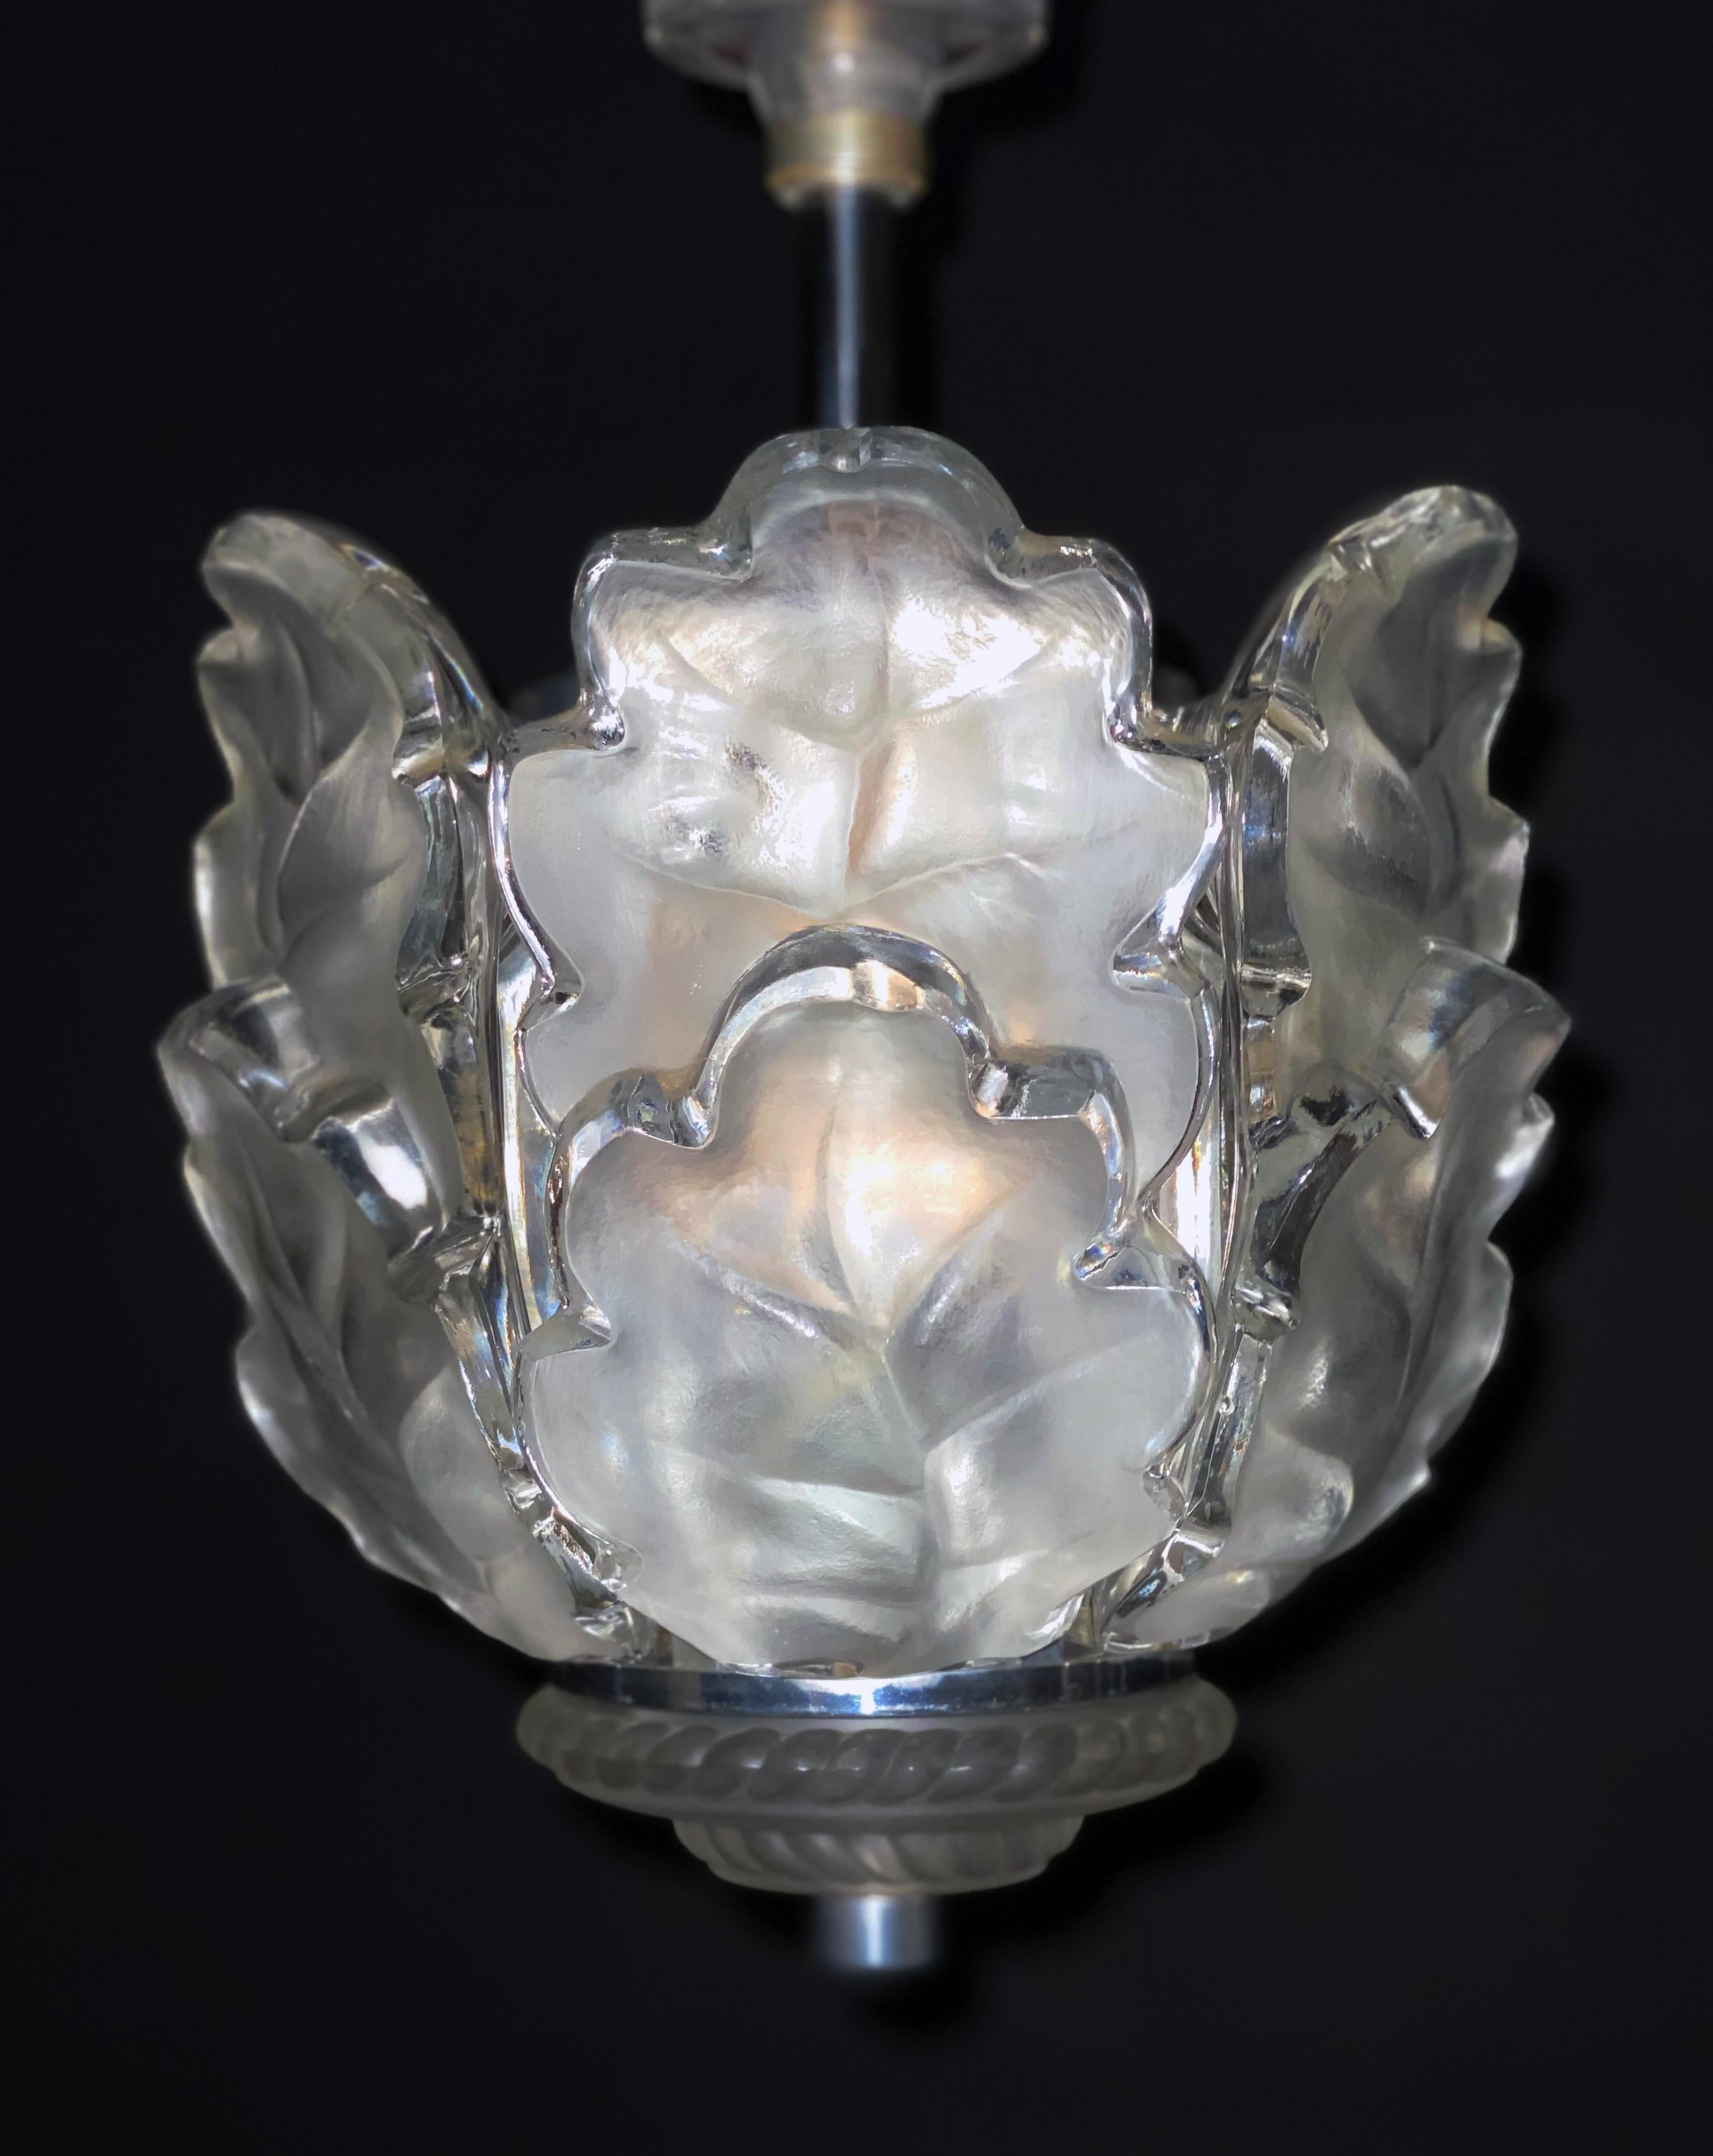 Lalique
Clear and frosted glass ceiling fixture “Chene” (Oak), model originally designed by Marc Lalique, circa 1955, measures: Diameter 10”, height 16